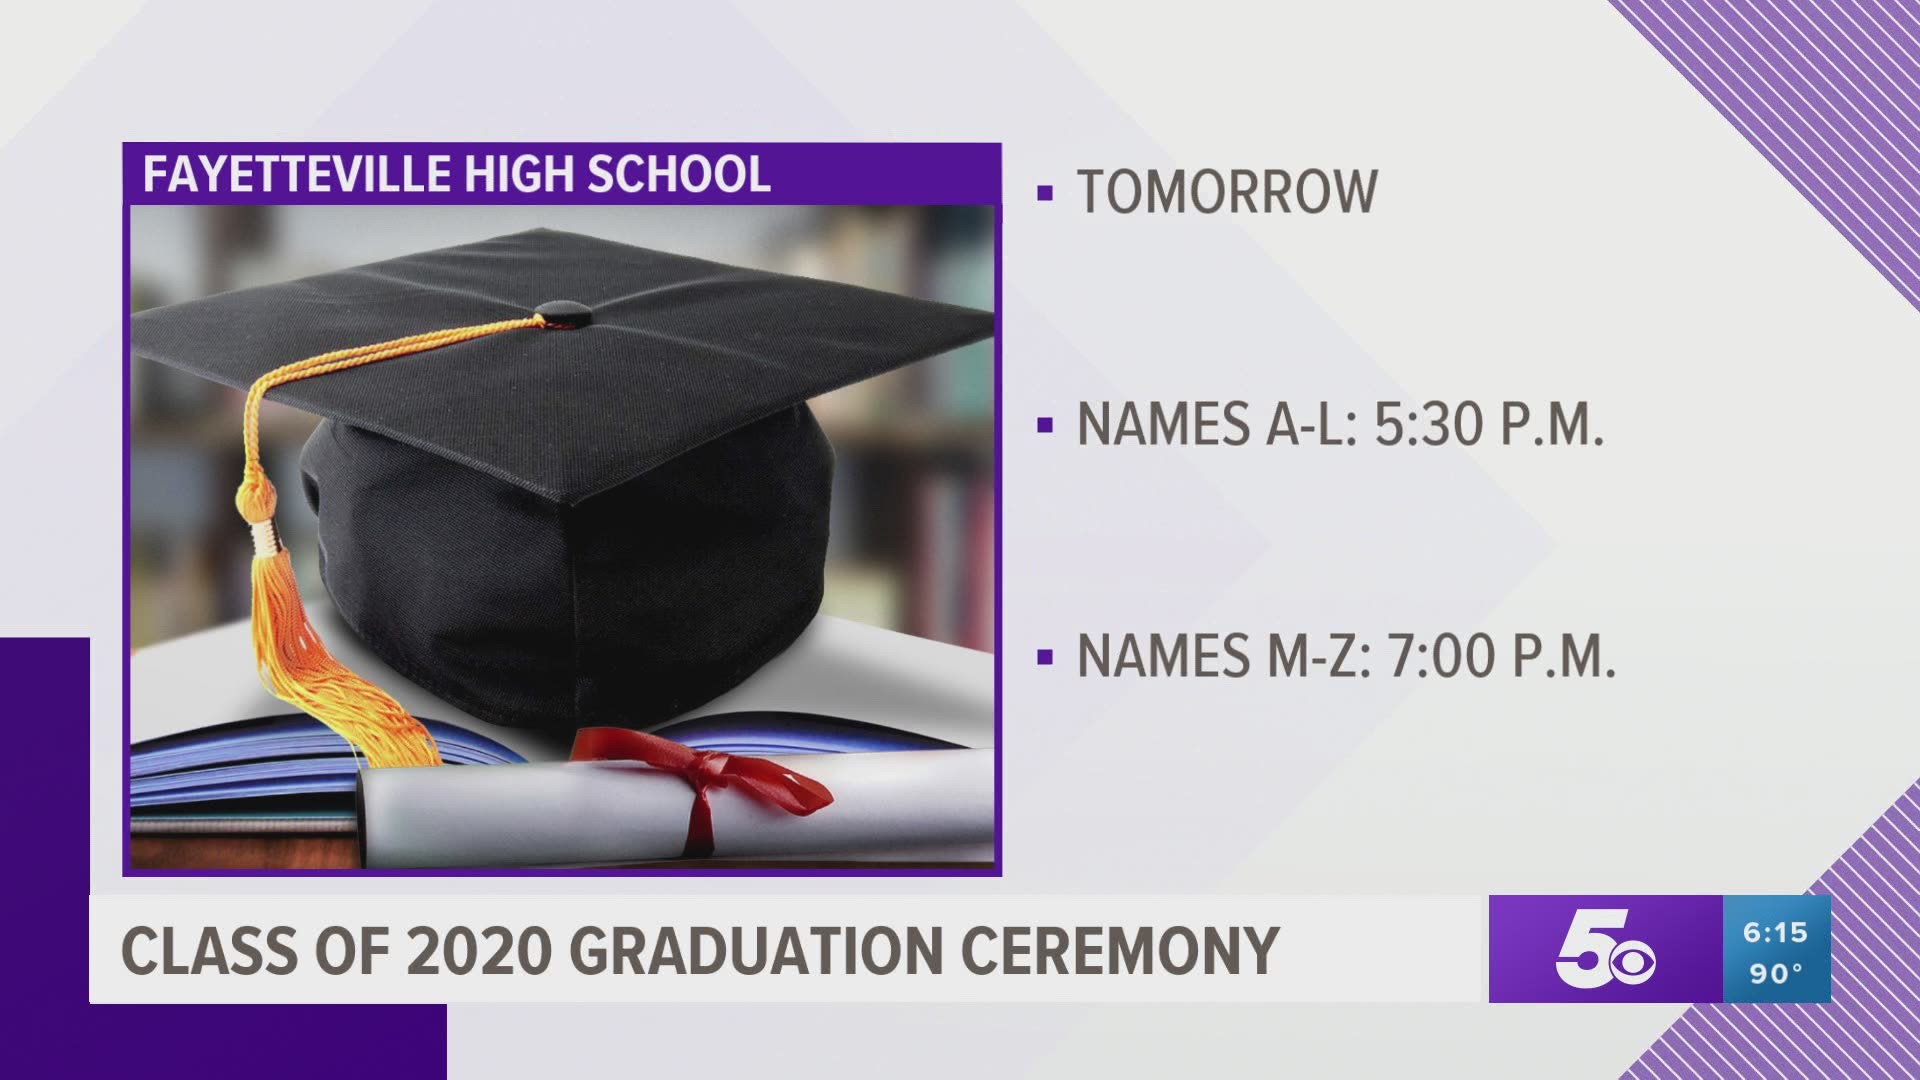 Fayetteville class of 2020 graduation ceremony scheduled